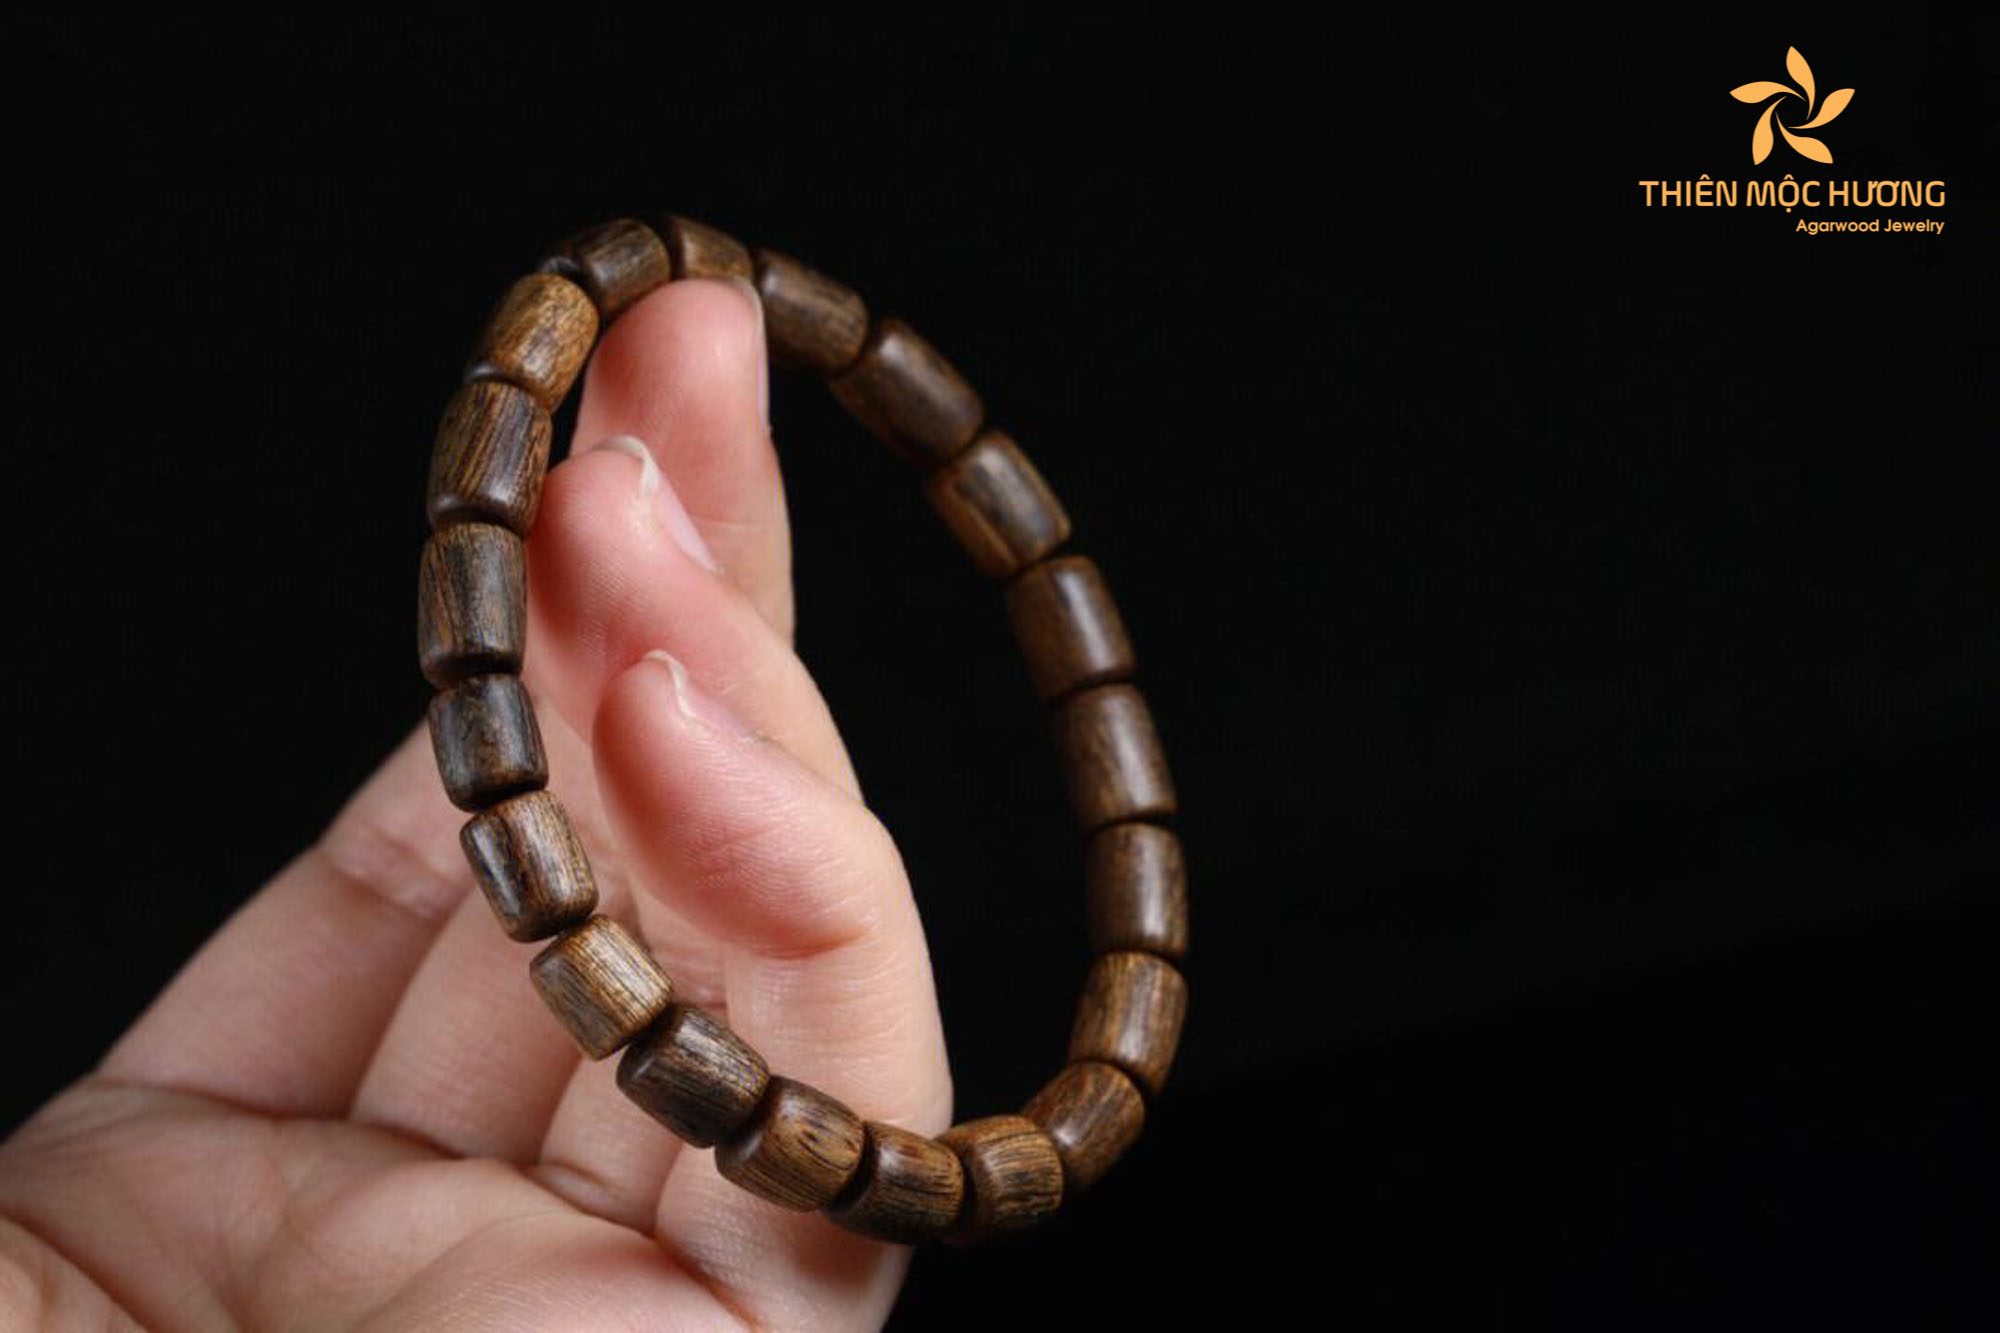 How to identify natural and artificial submerged sinking Agarwood bracelet? The water test